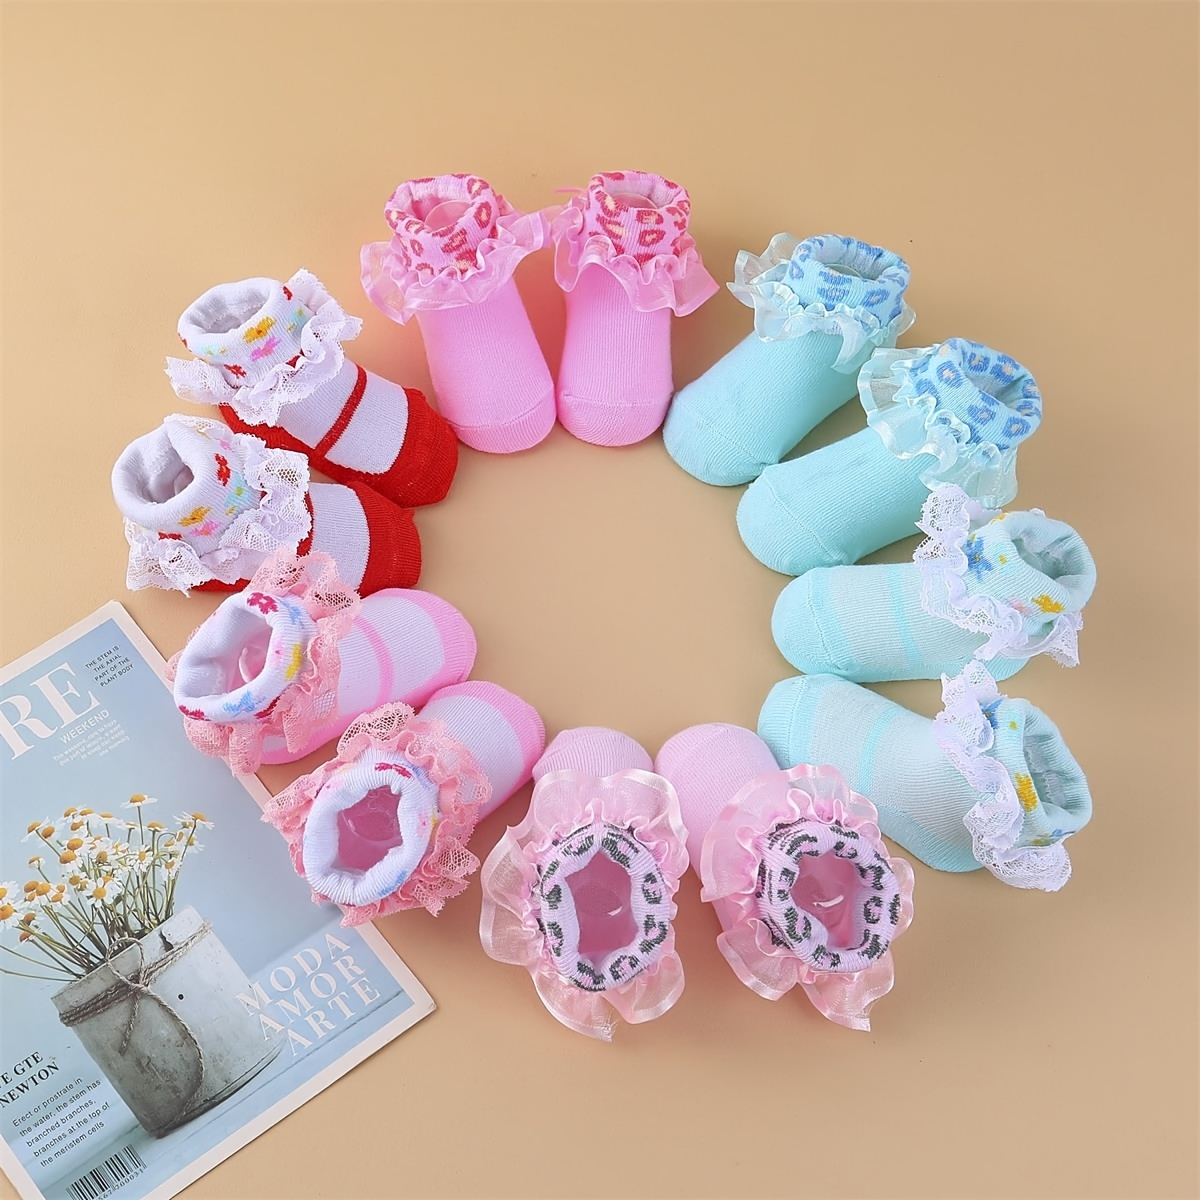 

6 Pairs Of Adorable Lace Toddler Socks For Your Little Princess - Perfect For Newborns, Babies, Toddlers & Little Girls!